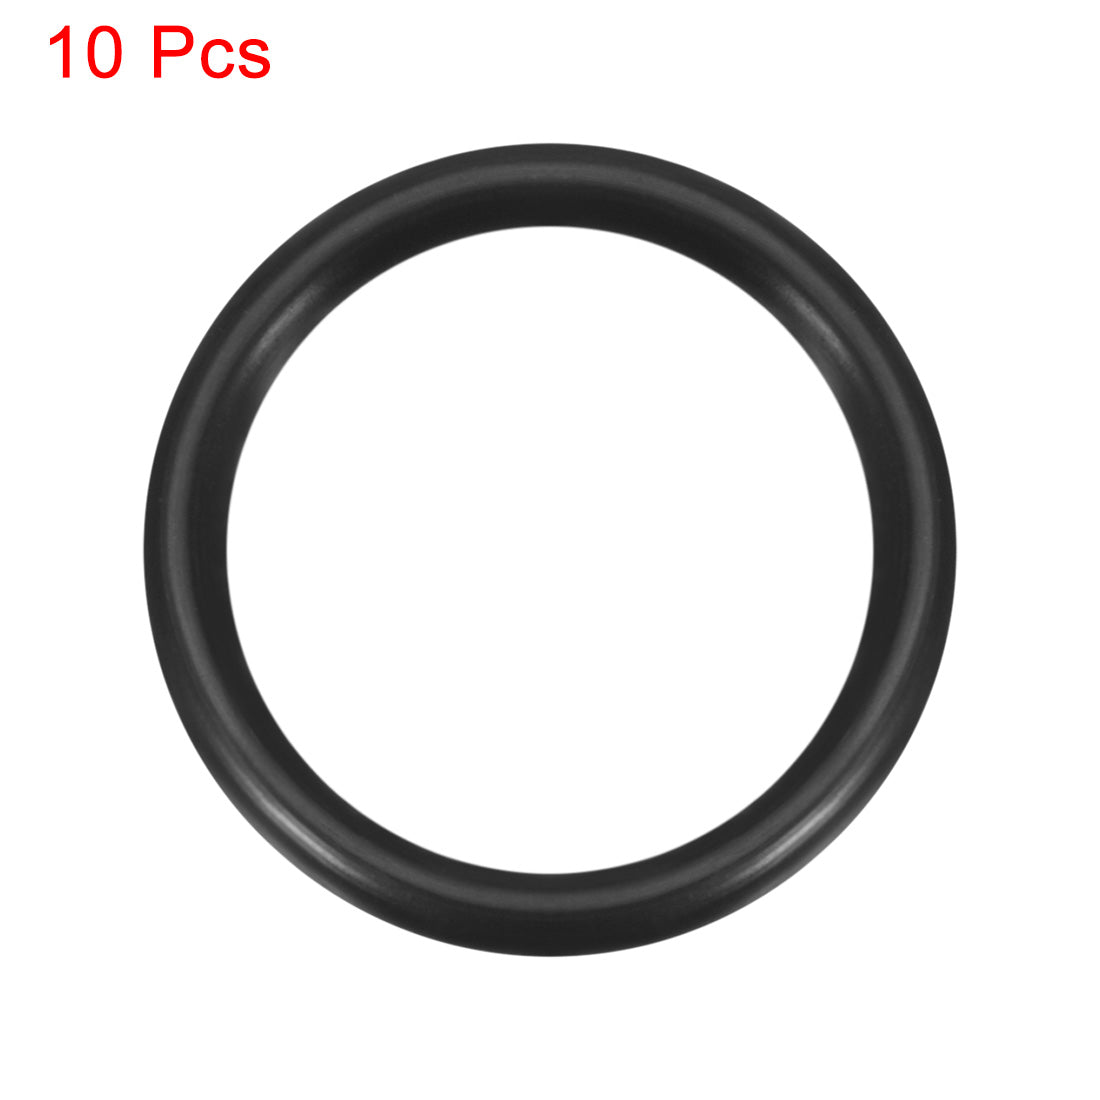 uxcell Uxcell O-Rings Nitrile Rubber 25mm x 30.3mm x 2.65mm Seal Rings Sealing Gasket 10pcs